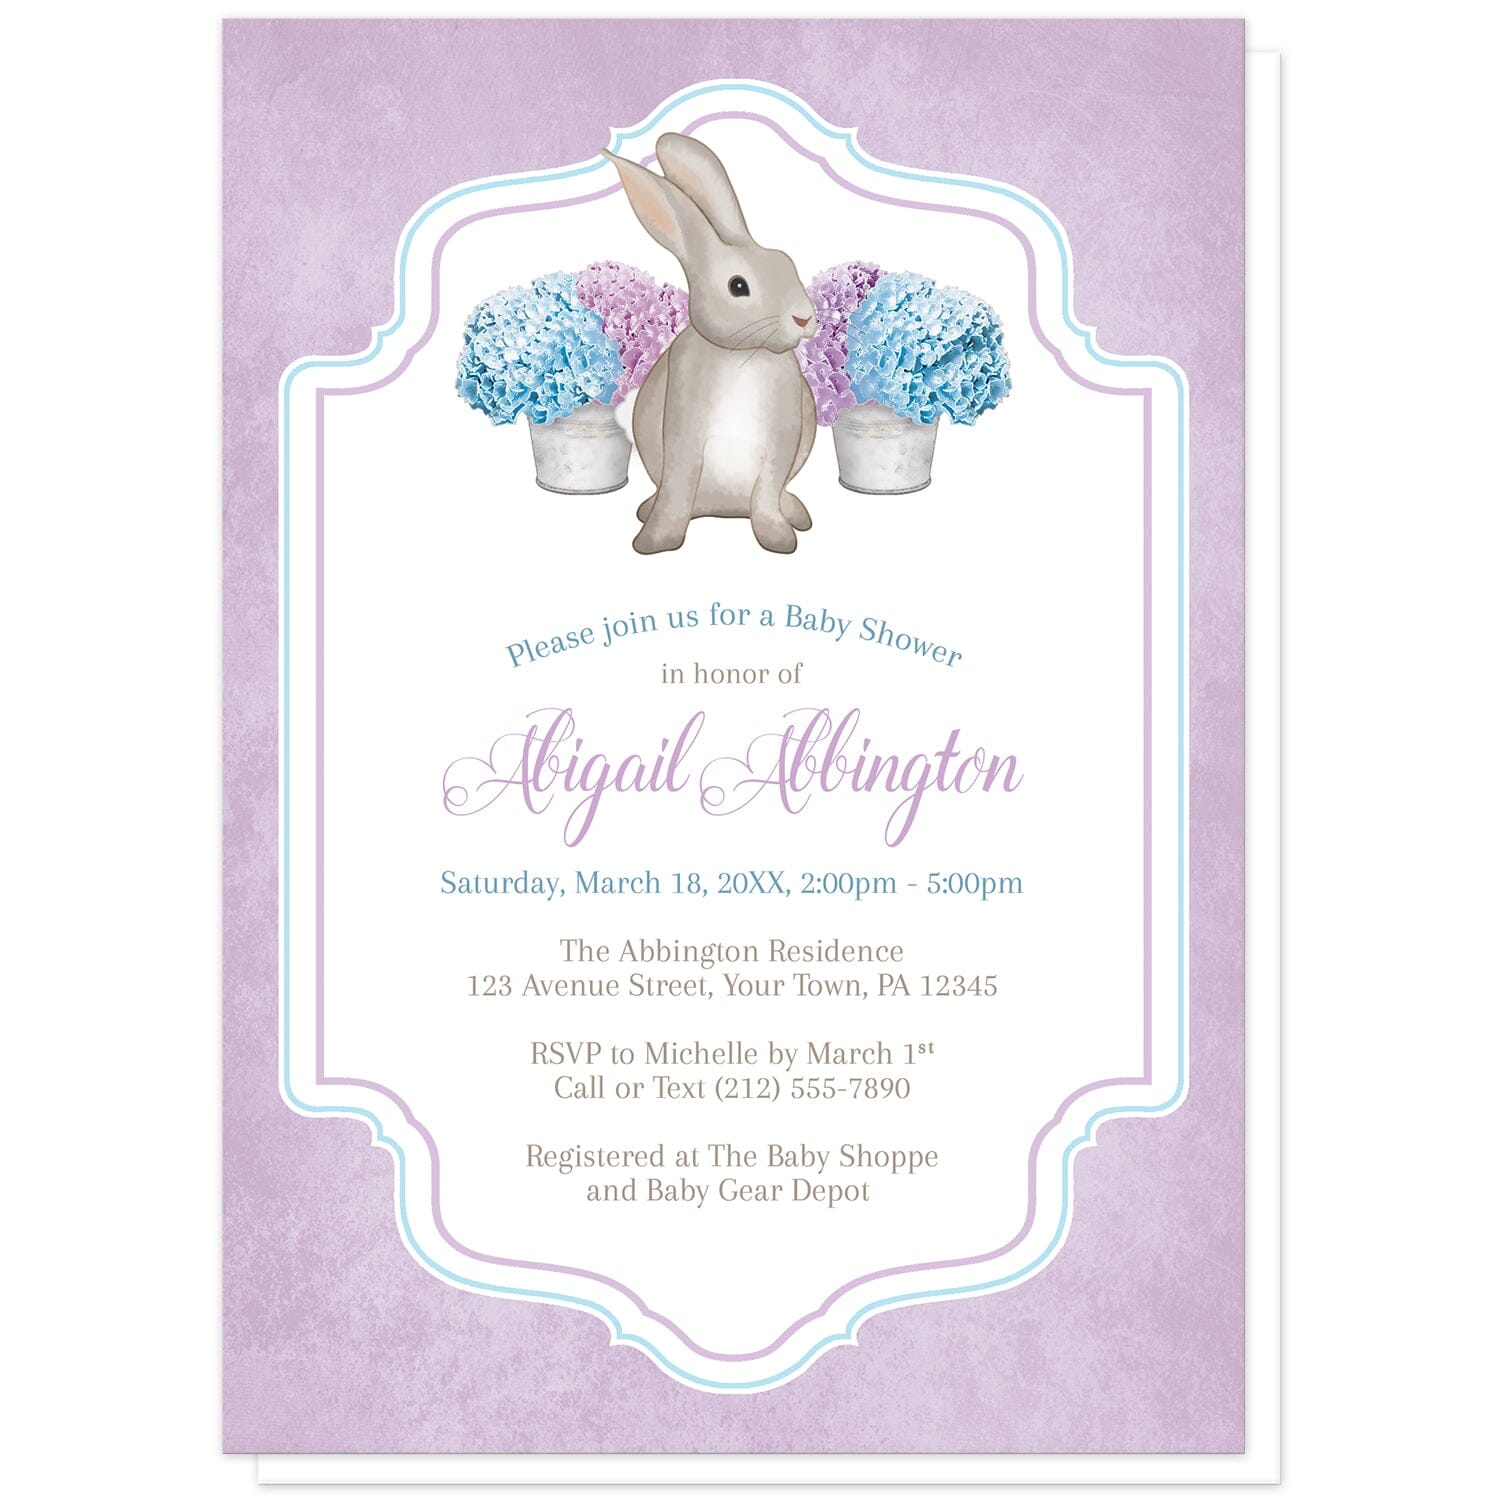 Purple Blue Hydrangea Rabbit Baby Shower Invitations at Artistically Invited. Purple blue hydrangea rabbit baby shower invitations with a watercolor-inspired illustration of cute little brown bunny rabbit with blue and purple hydrangea floral arrangements in tin buckets. Your personalized baby shower celebration details are custom printed in purple, blue, and brown in the white frame area outlined with blue and purple, over a light rustic purple colored background.